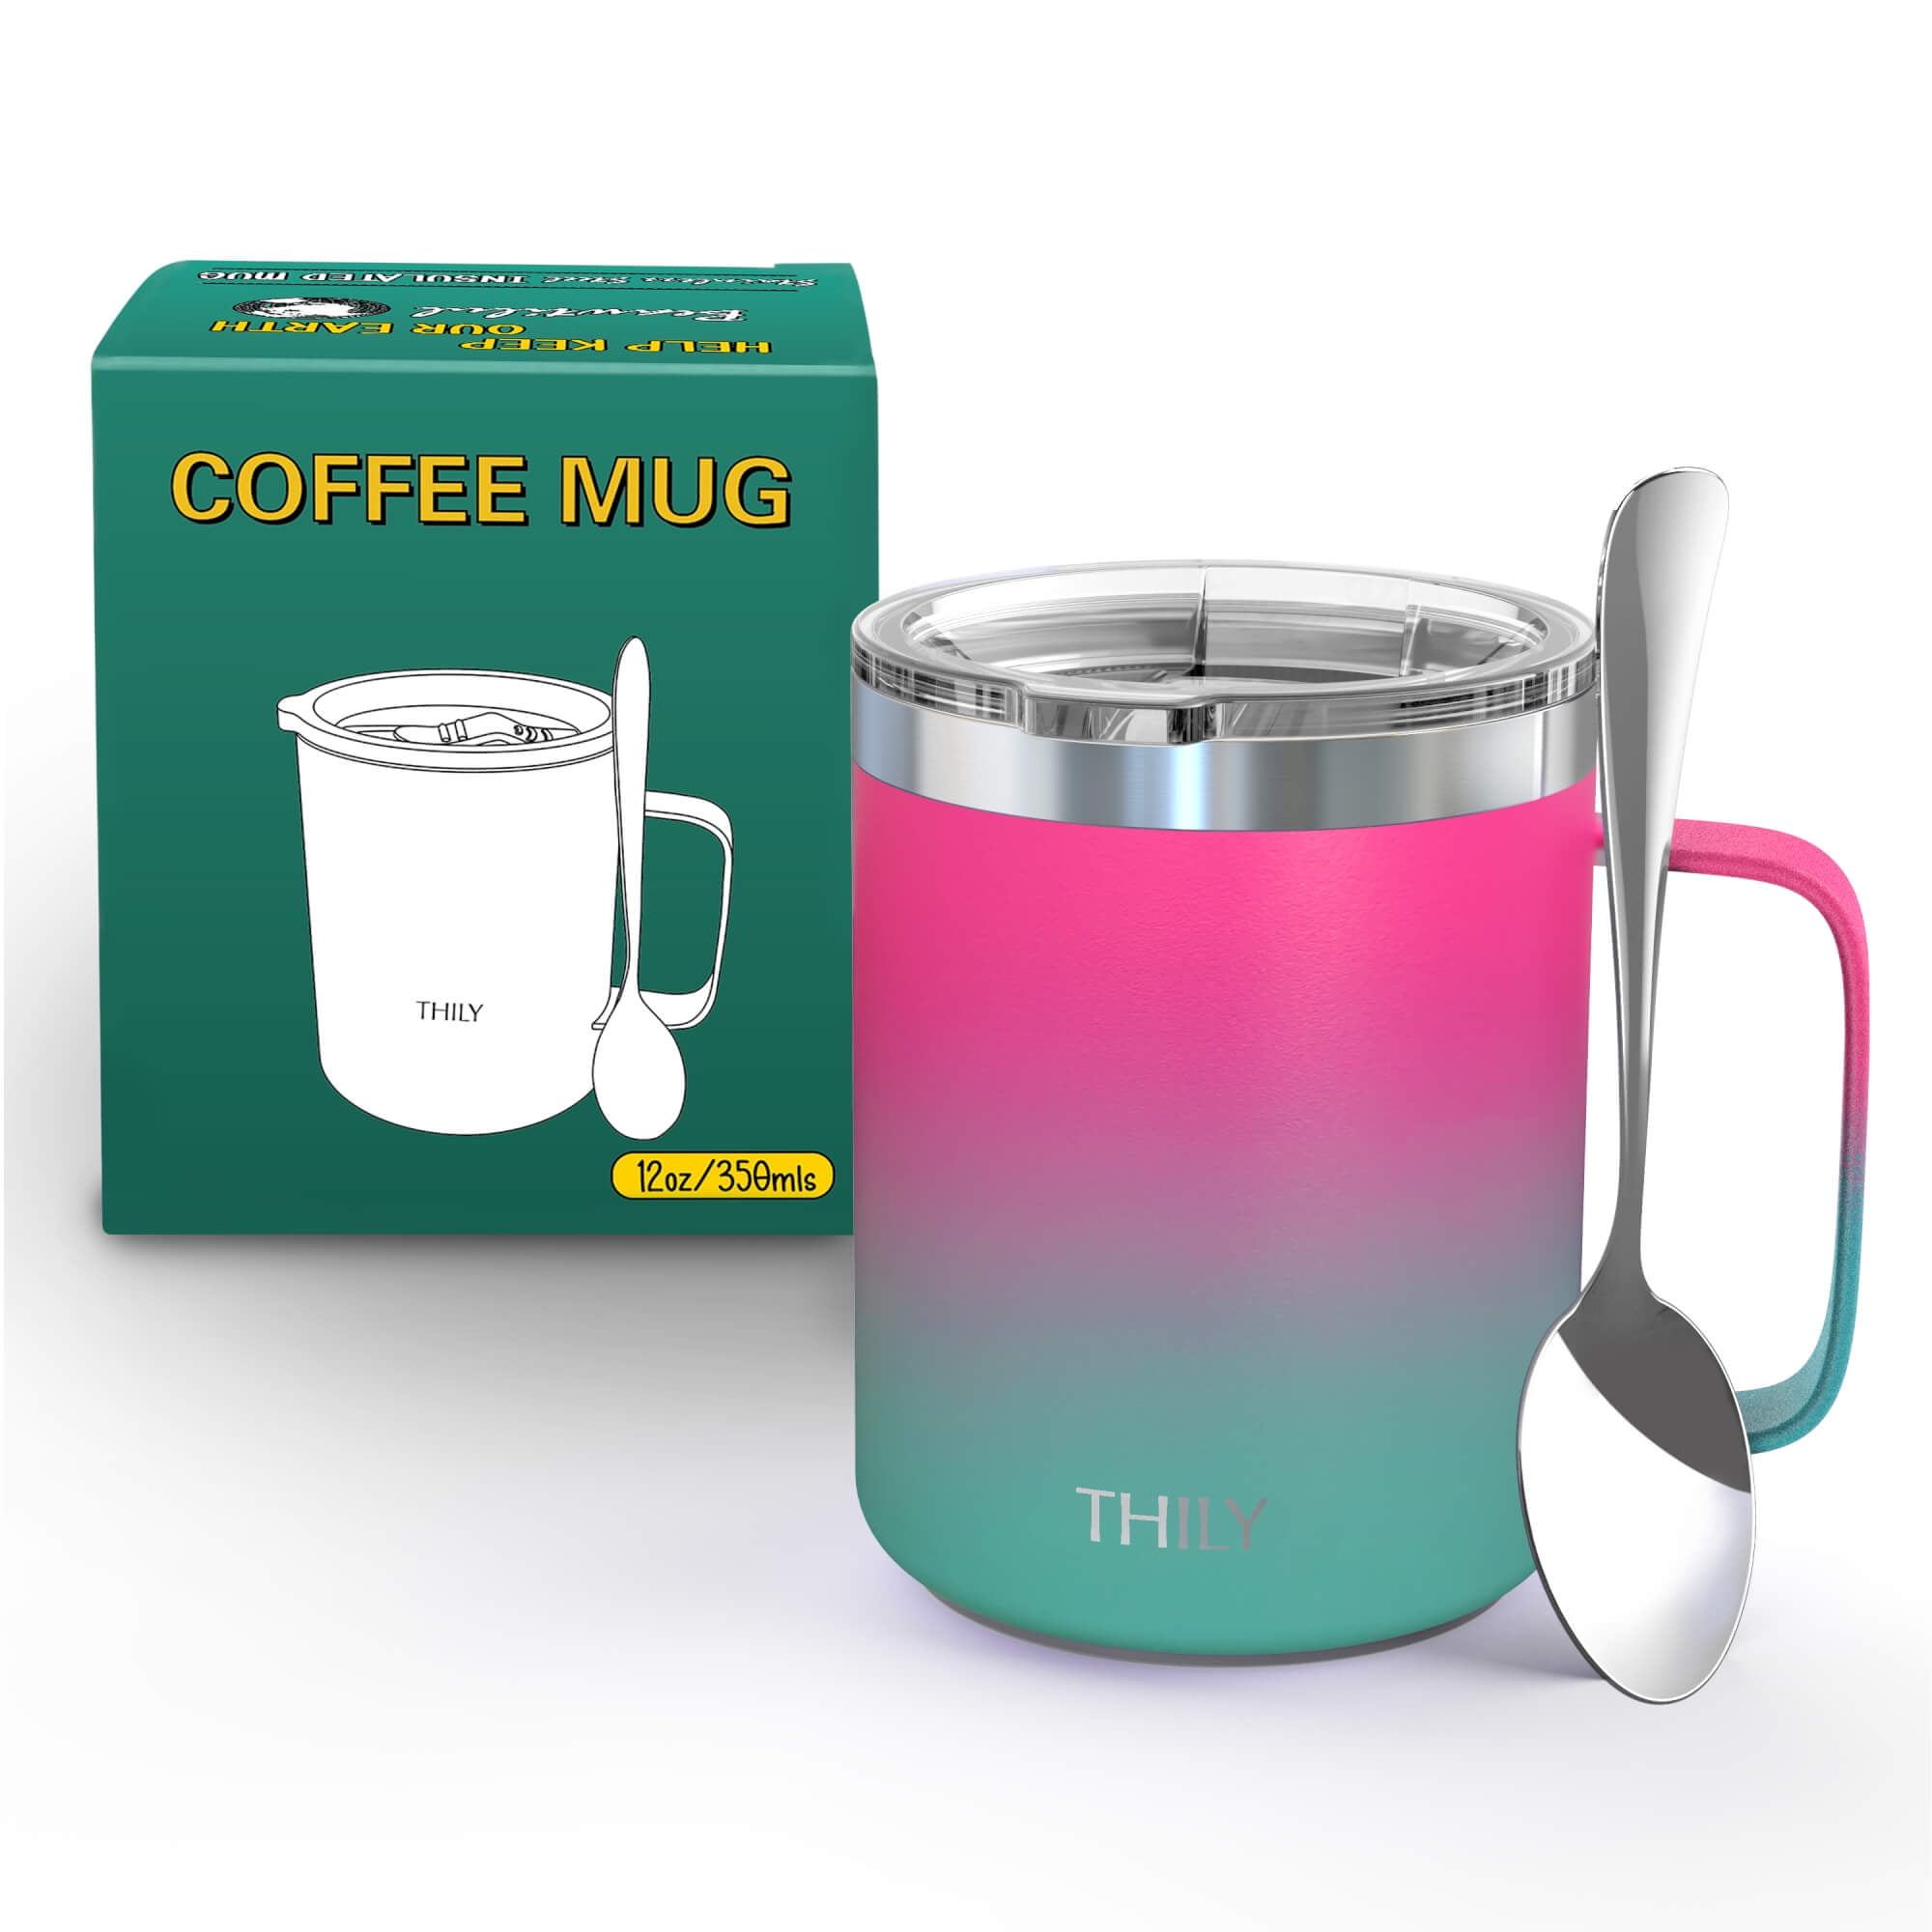 IN STOCK, Green Pink Ribbed Ceramic Travel Mug With Silicone Lid